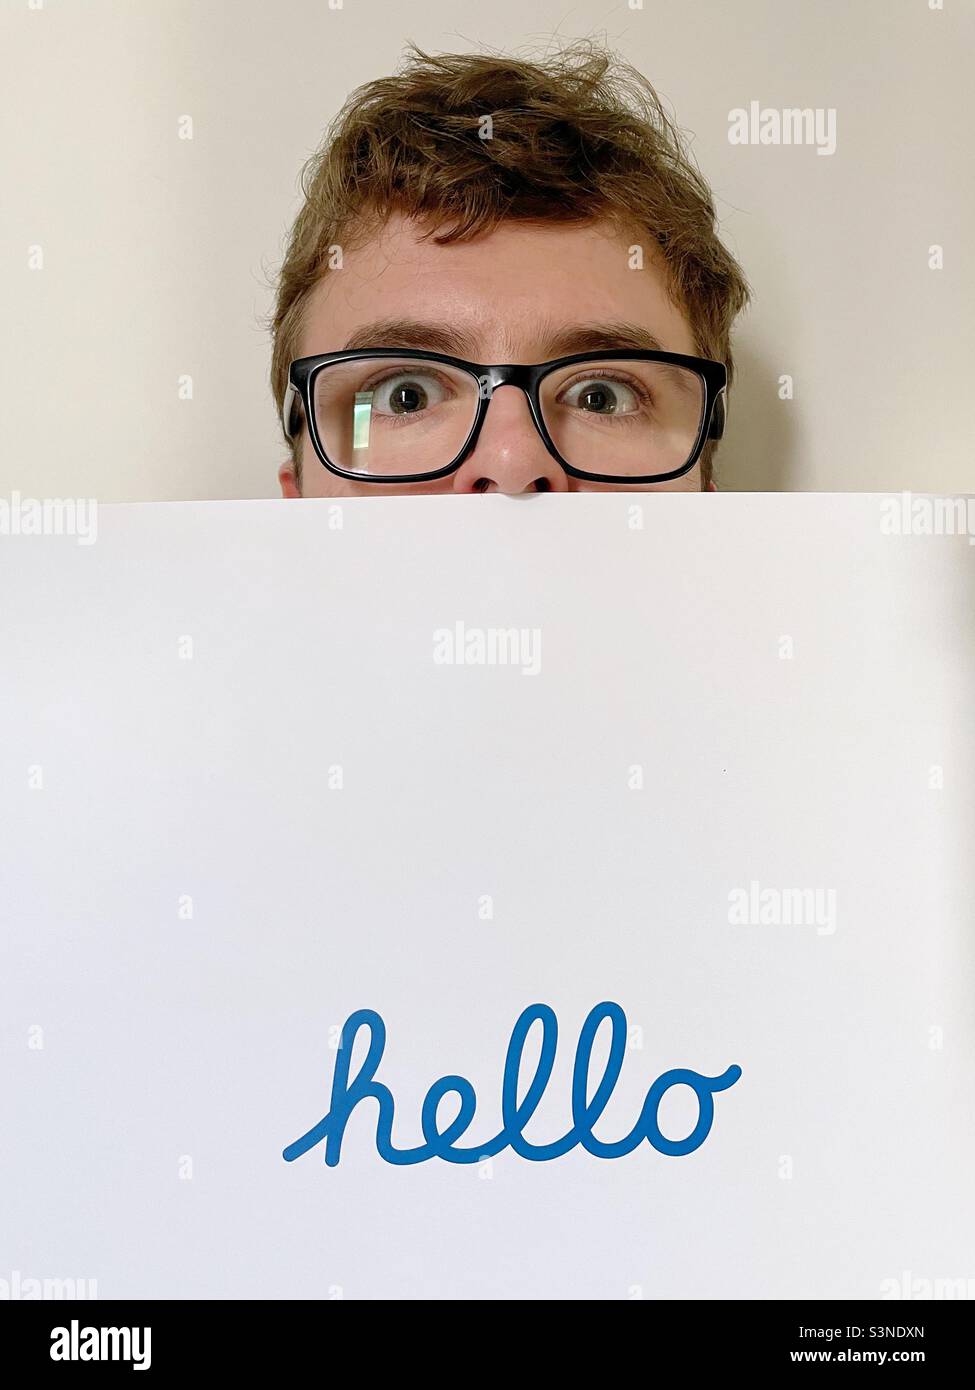 A shy and uncertain young male hiding behind a background with the word hello written in text during an introduction Stock Photo